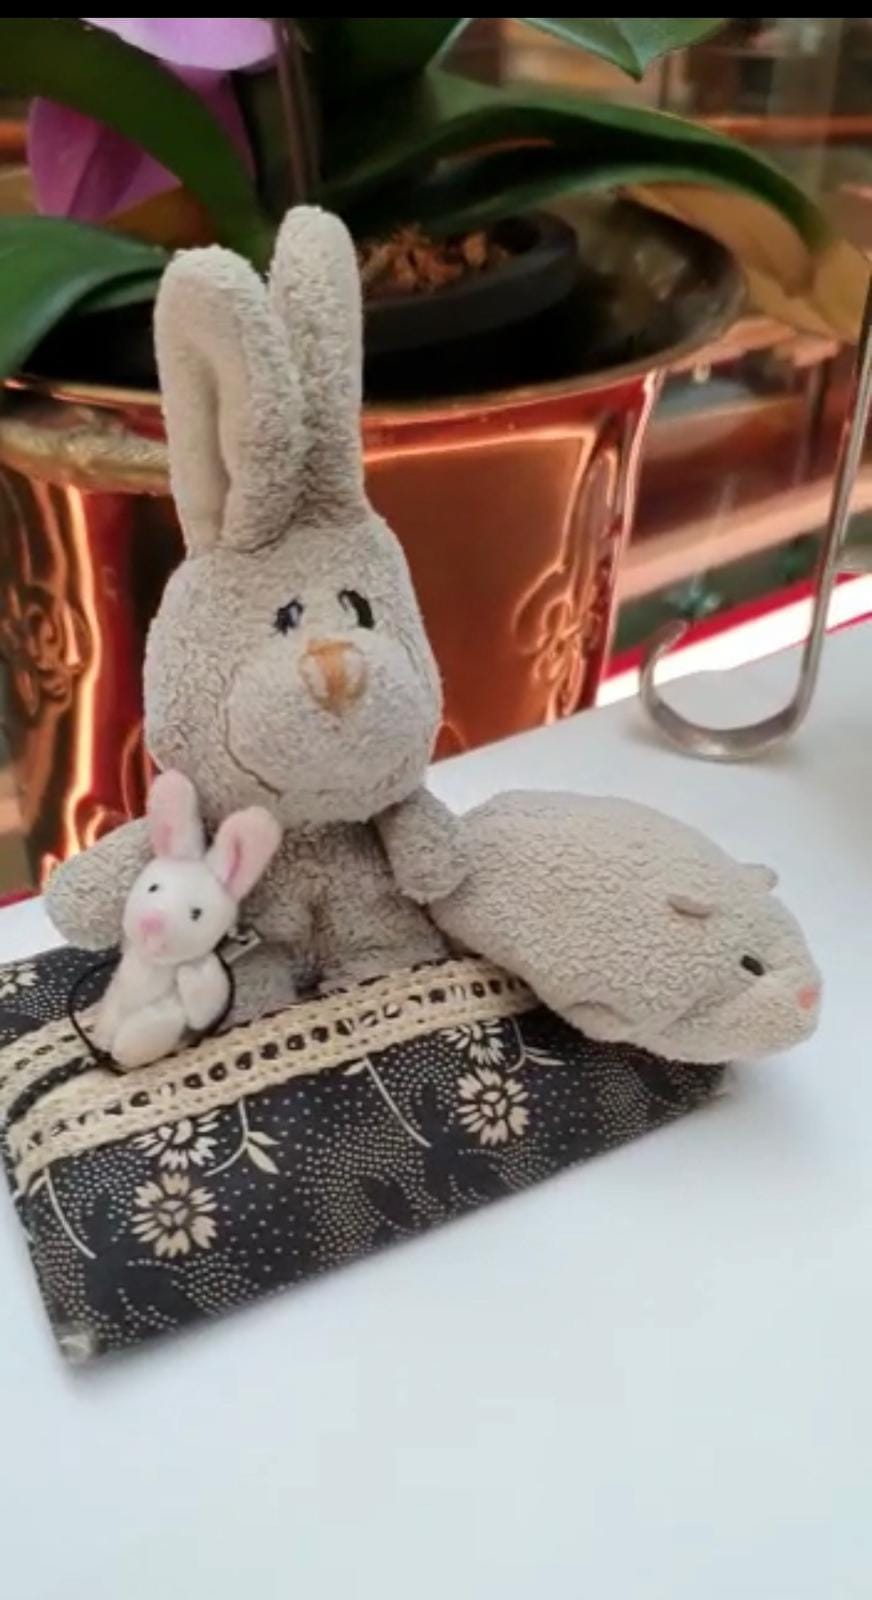 Sg woman offers rm34k for missing soft toys, says she's had them for over 10 years